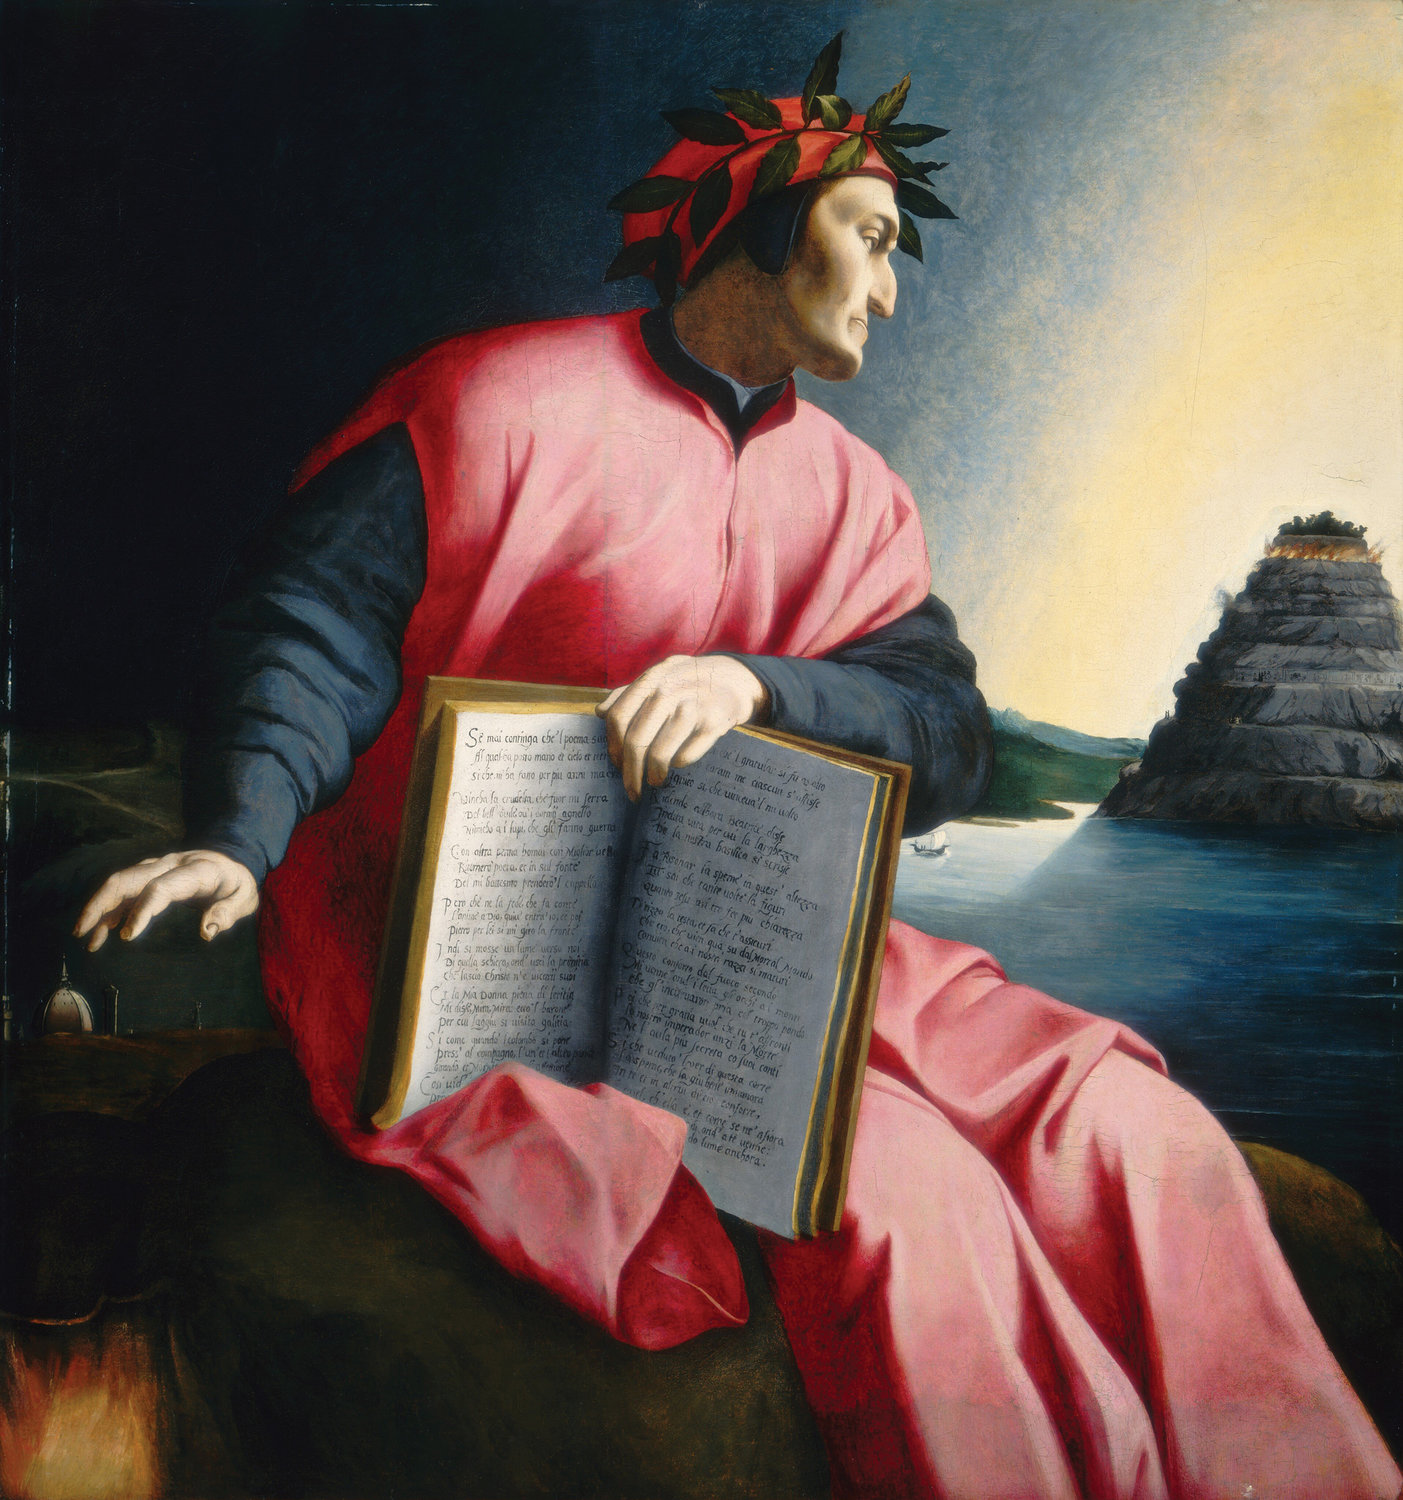 ‘PROPHET OF HOPE’—An oil on panel entitled “Allegorical Portrait of Dante, late 16th century” is seen in this undated photo. Dante’s "Divine Comedy" is perhaps the most powerful depiction of the transcendent in Western literature.